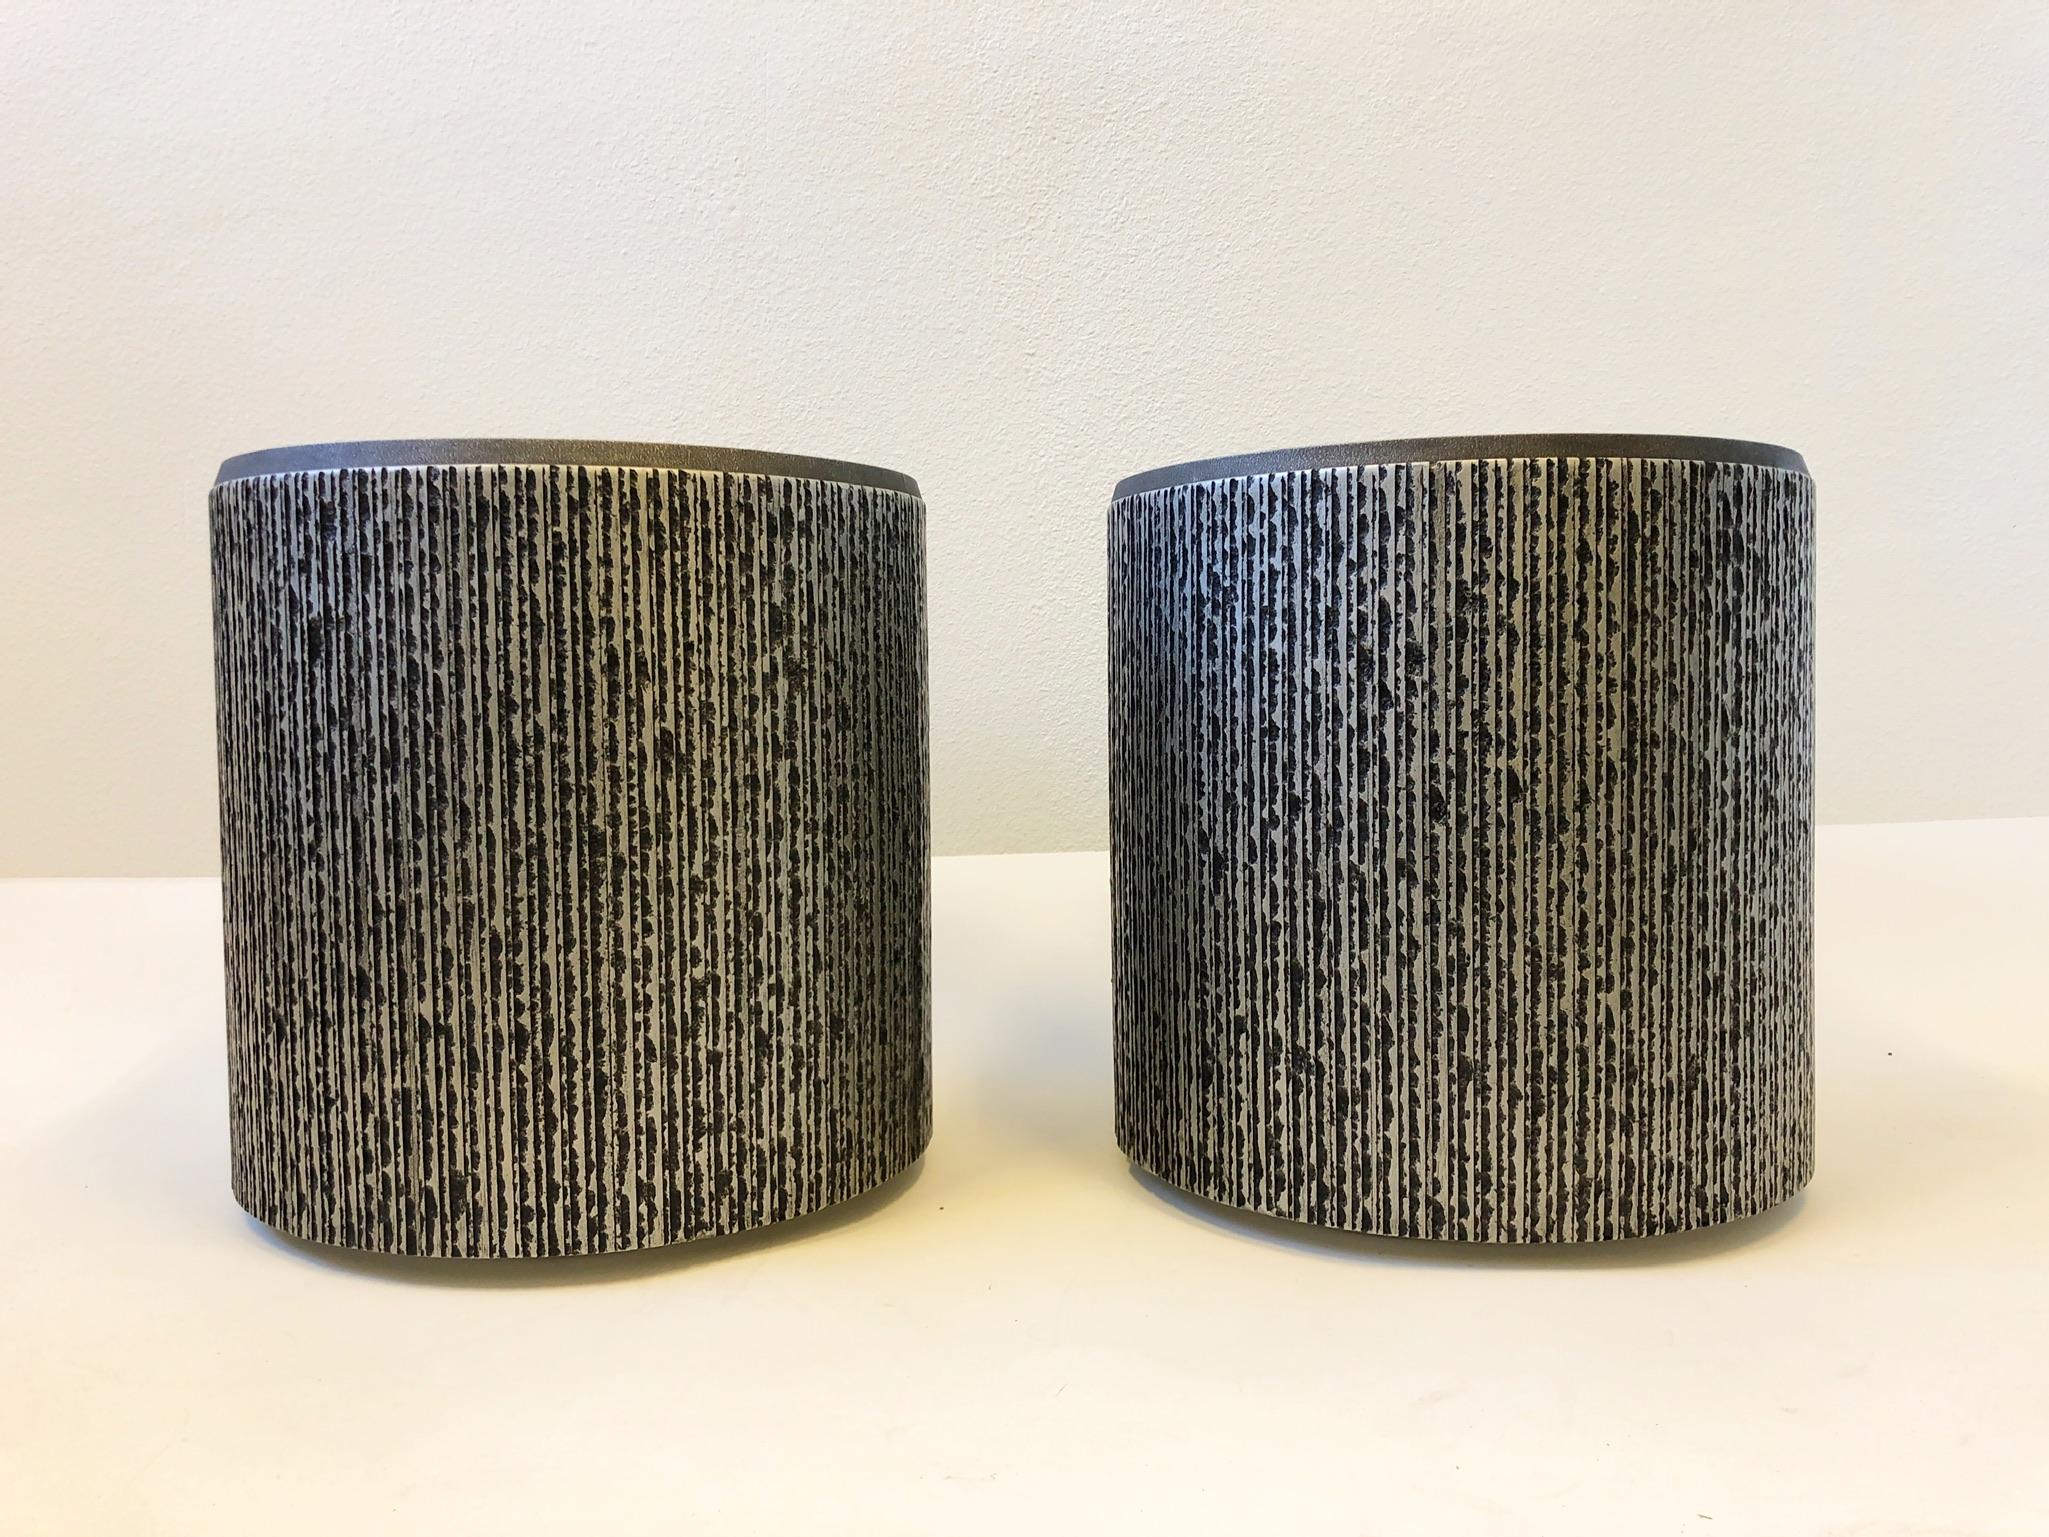 Fiberglass Pair of Brutalist Silver and Black Architectural Planters by Forms and Surfaces